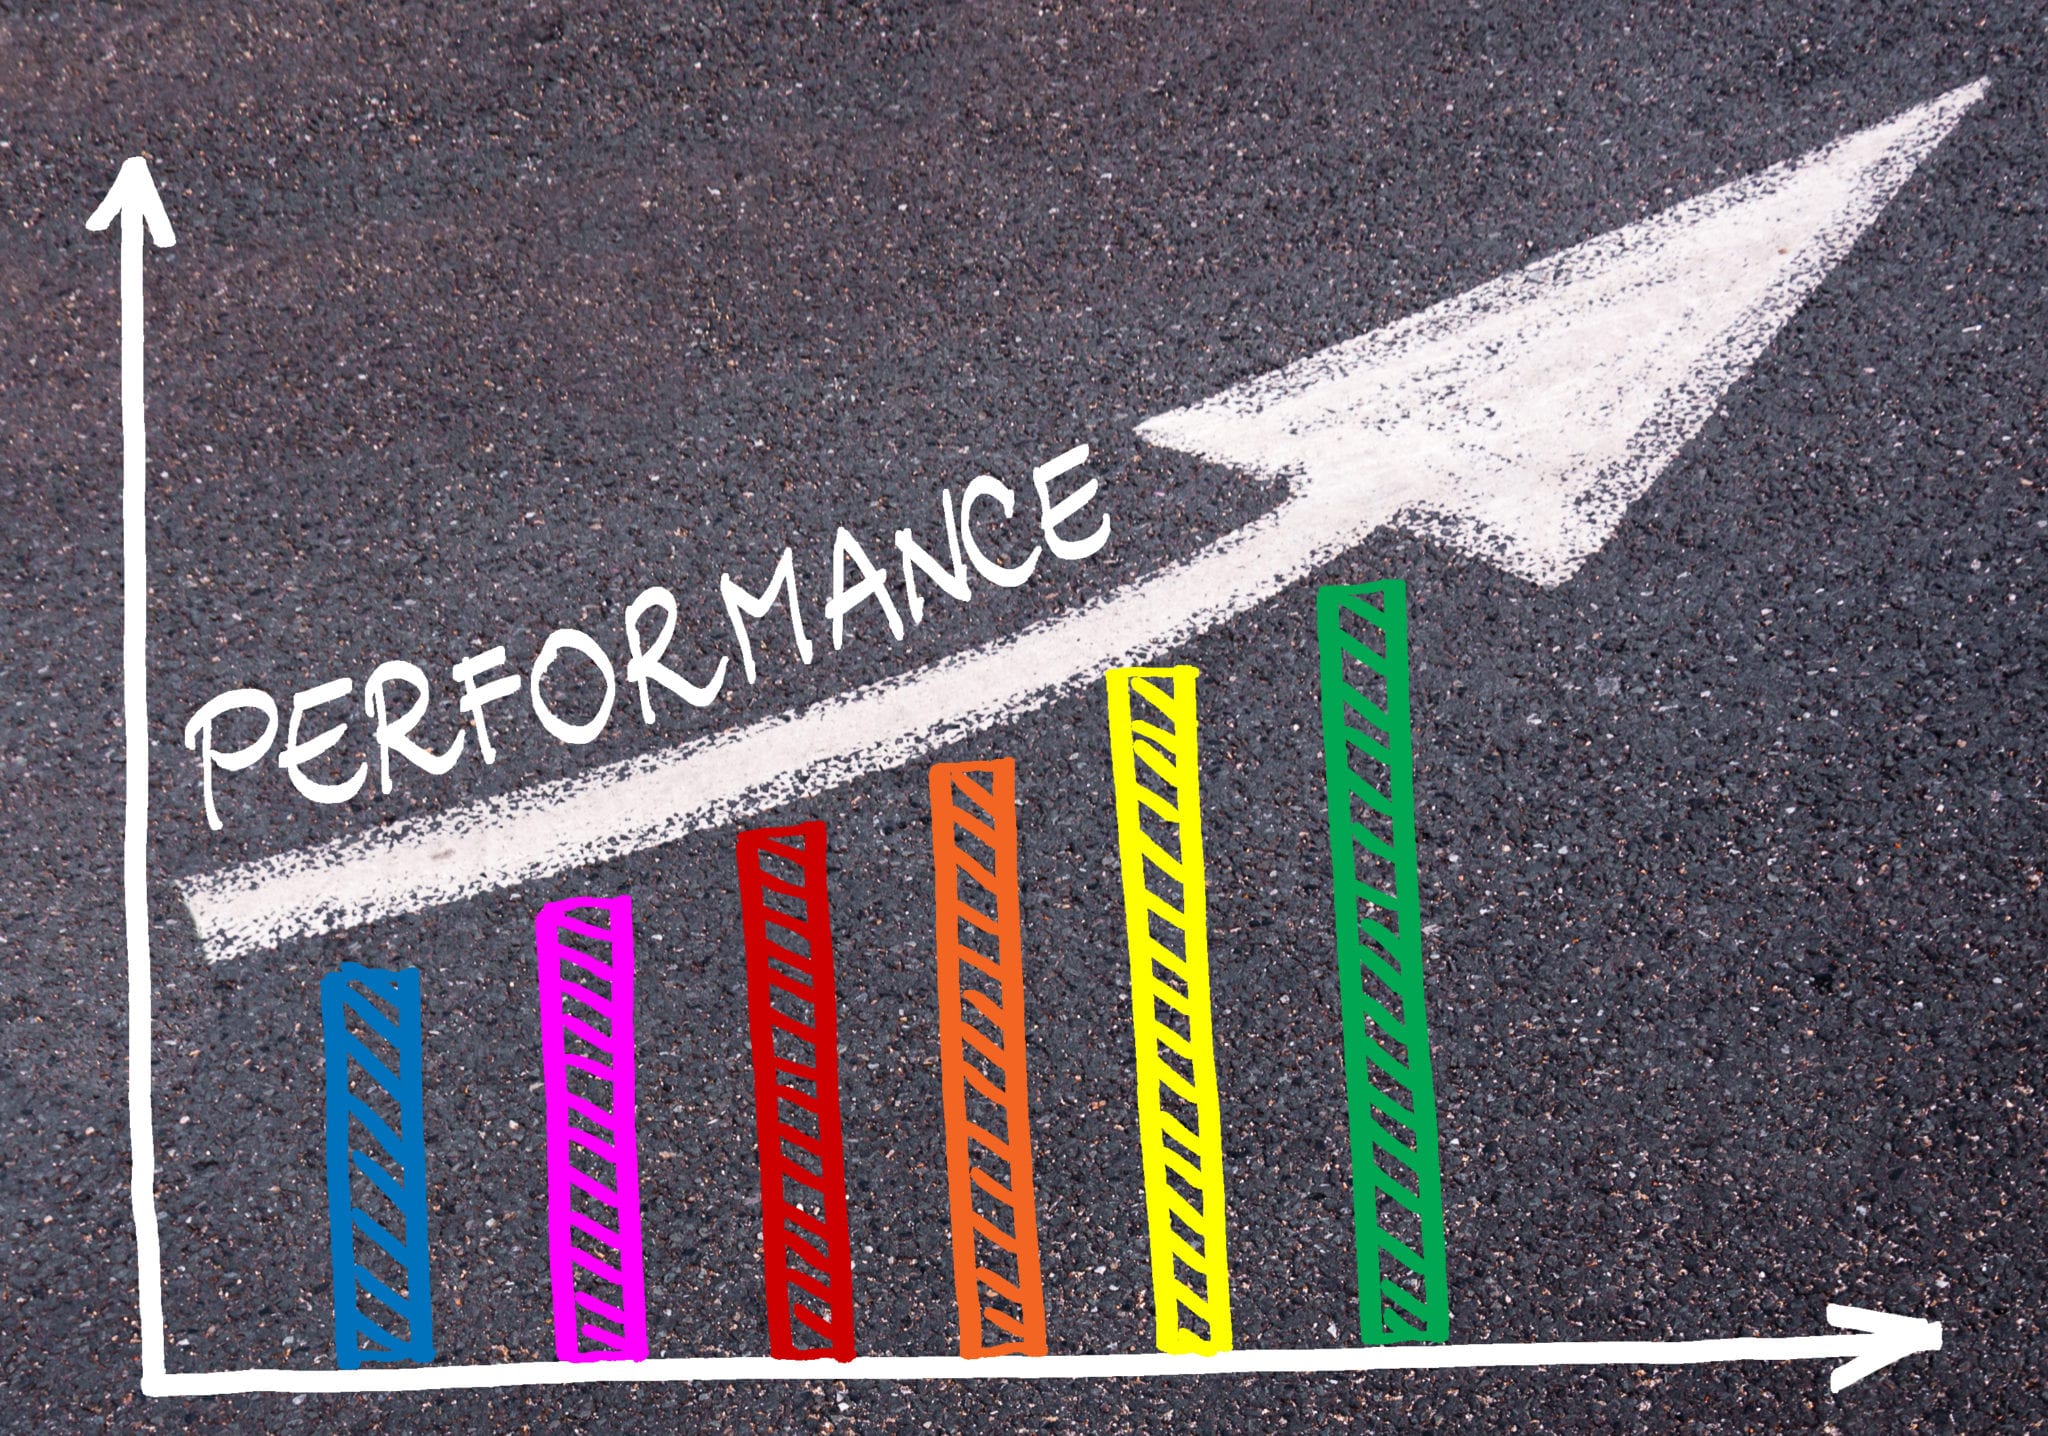 7 Performance Metrics You Need to Watch for Successful Business Operations